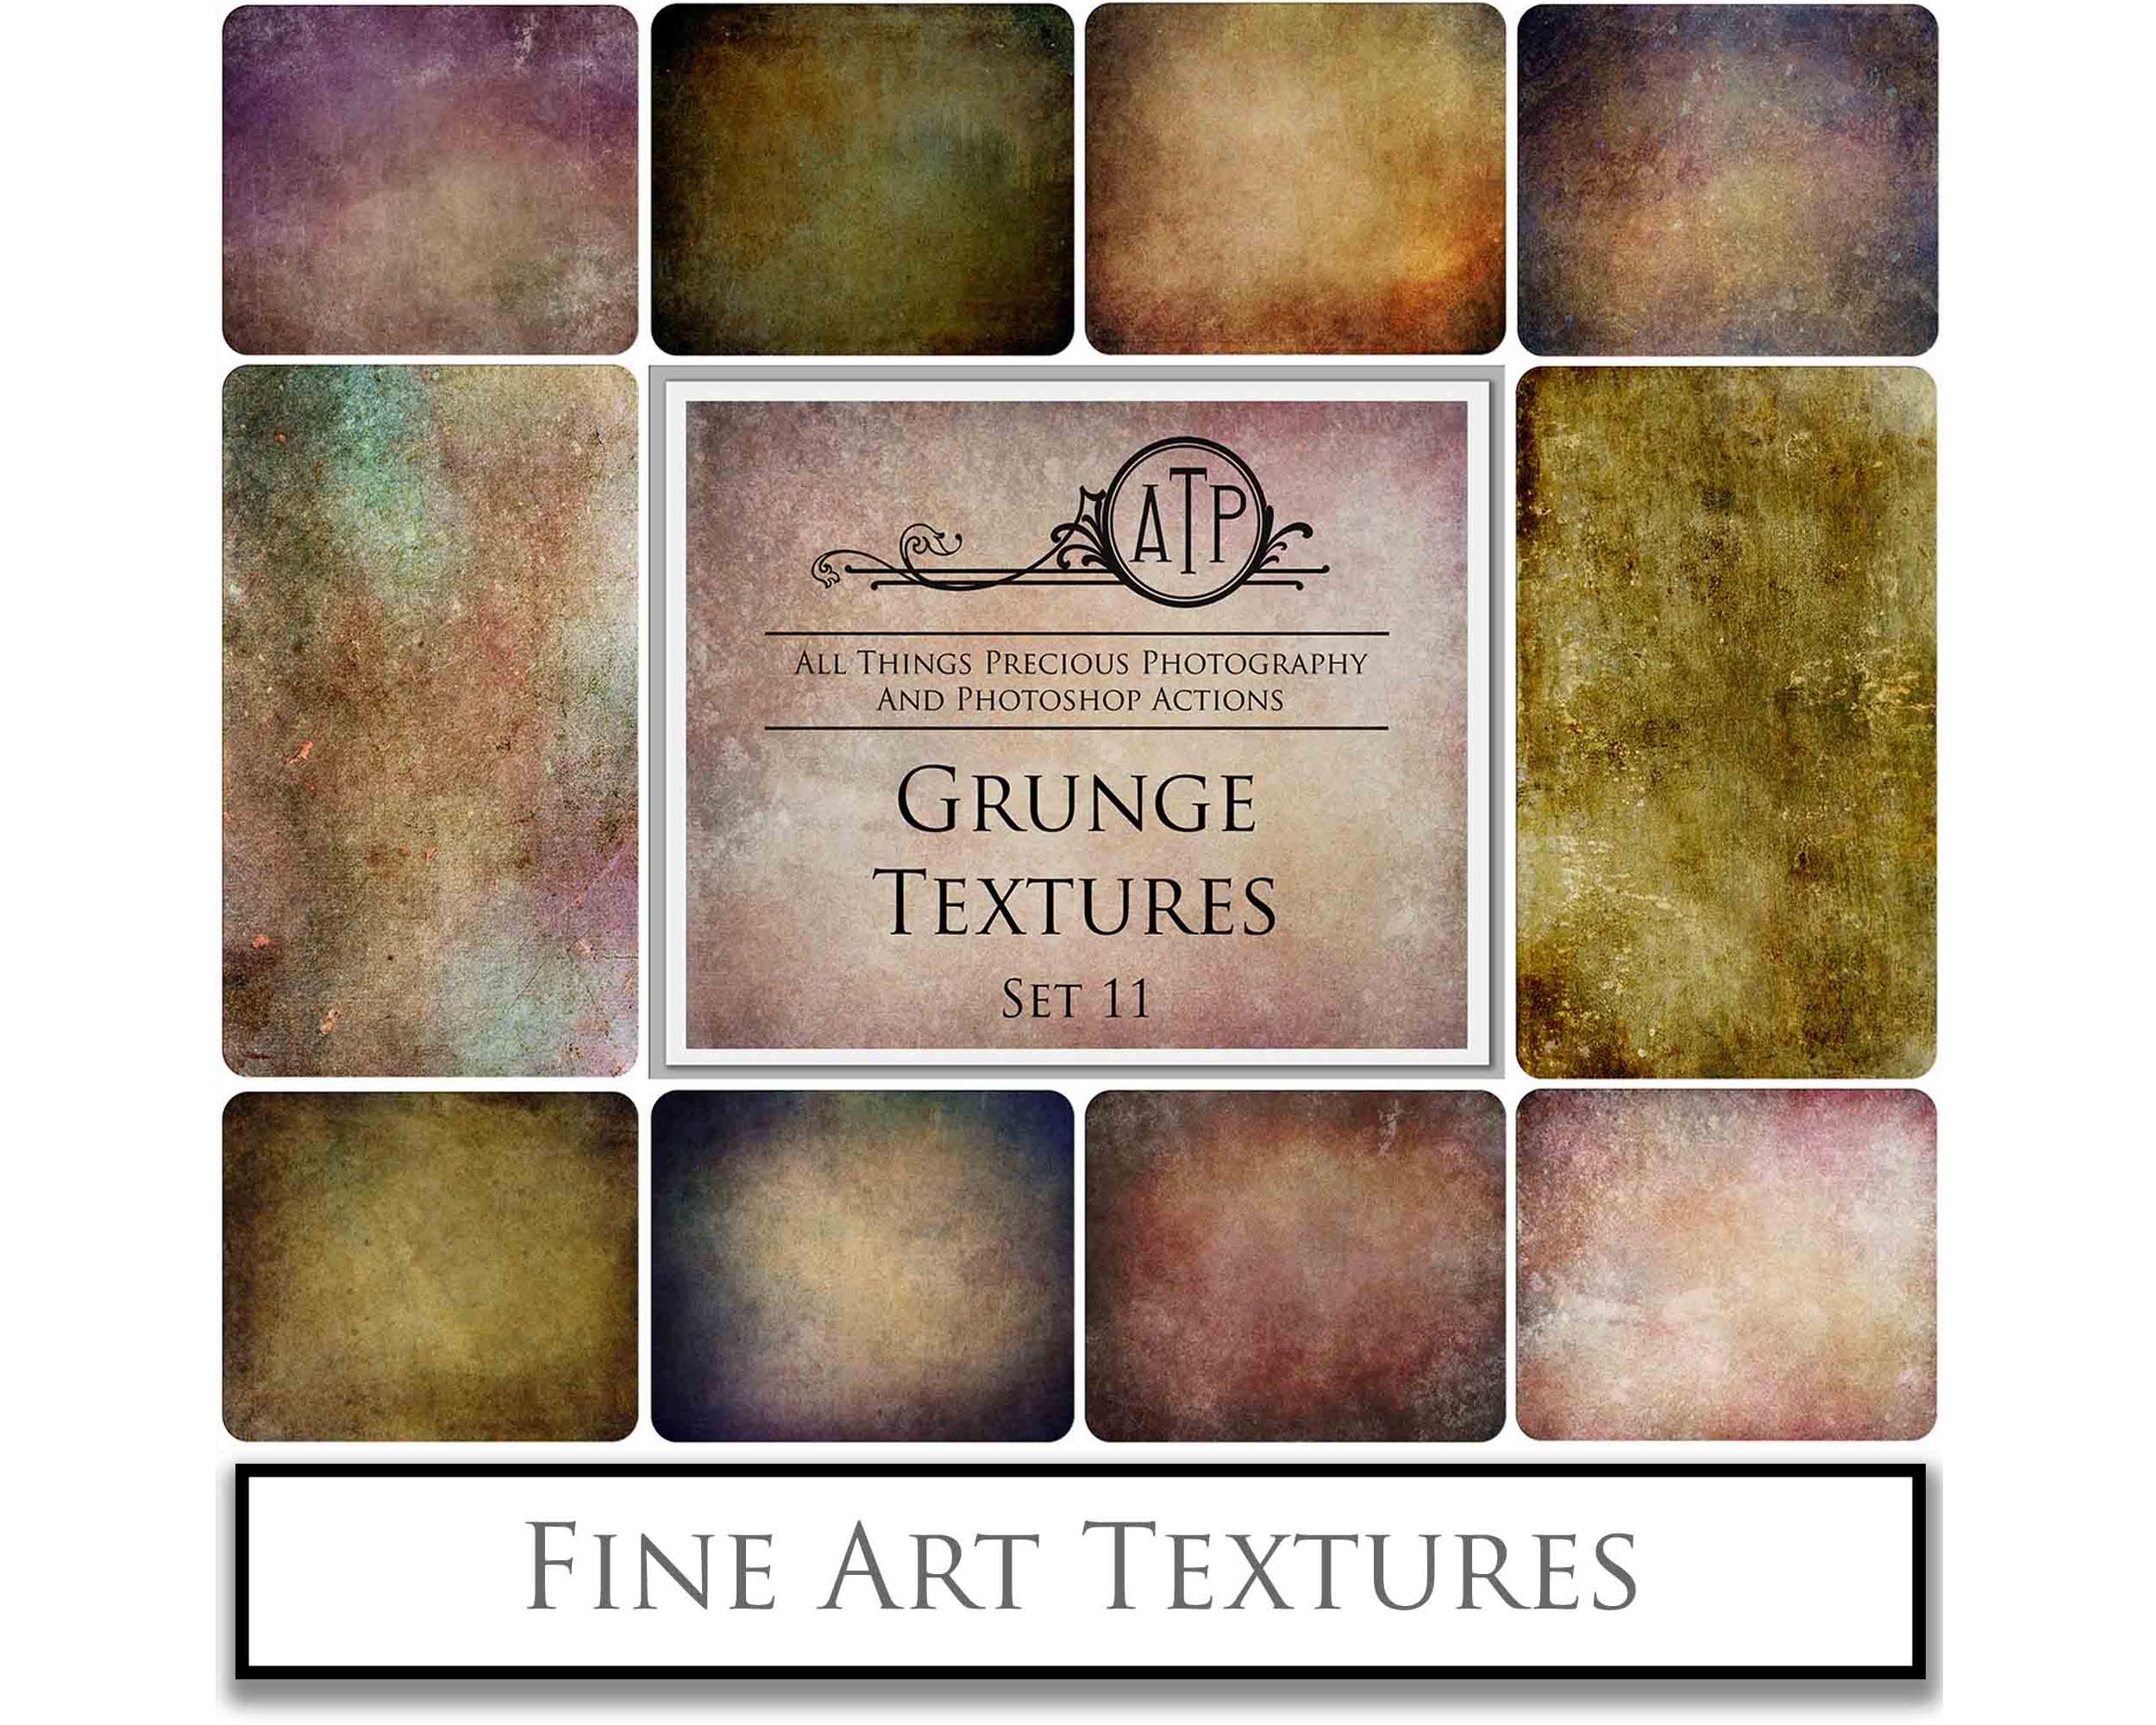 Fine art textures. Rich, Nature colour tints. Texture for photographers and digital editing. Photo Overlays. Antique, Vintage, Grunge, Light, Dark Bundle. Textured printable Canvas, Colour, Monochrome, Bundle. High resolution, 300dpi Graphic Assets for photography, digital scrapbooking and design. By ATP Textures